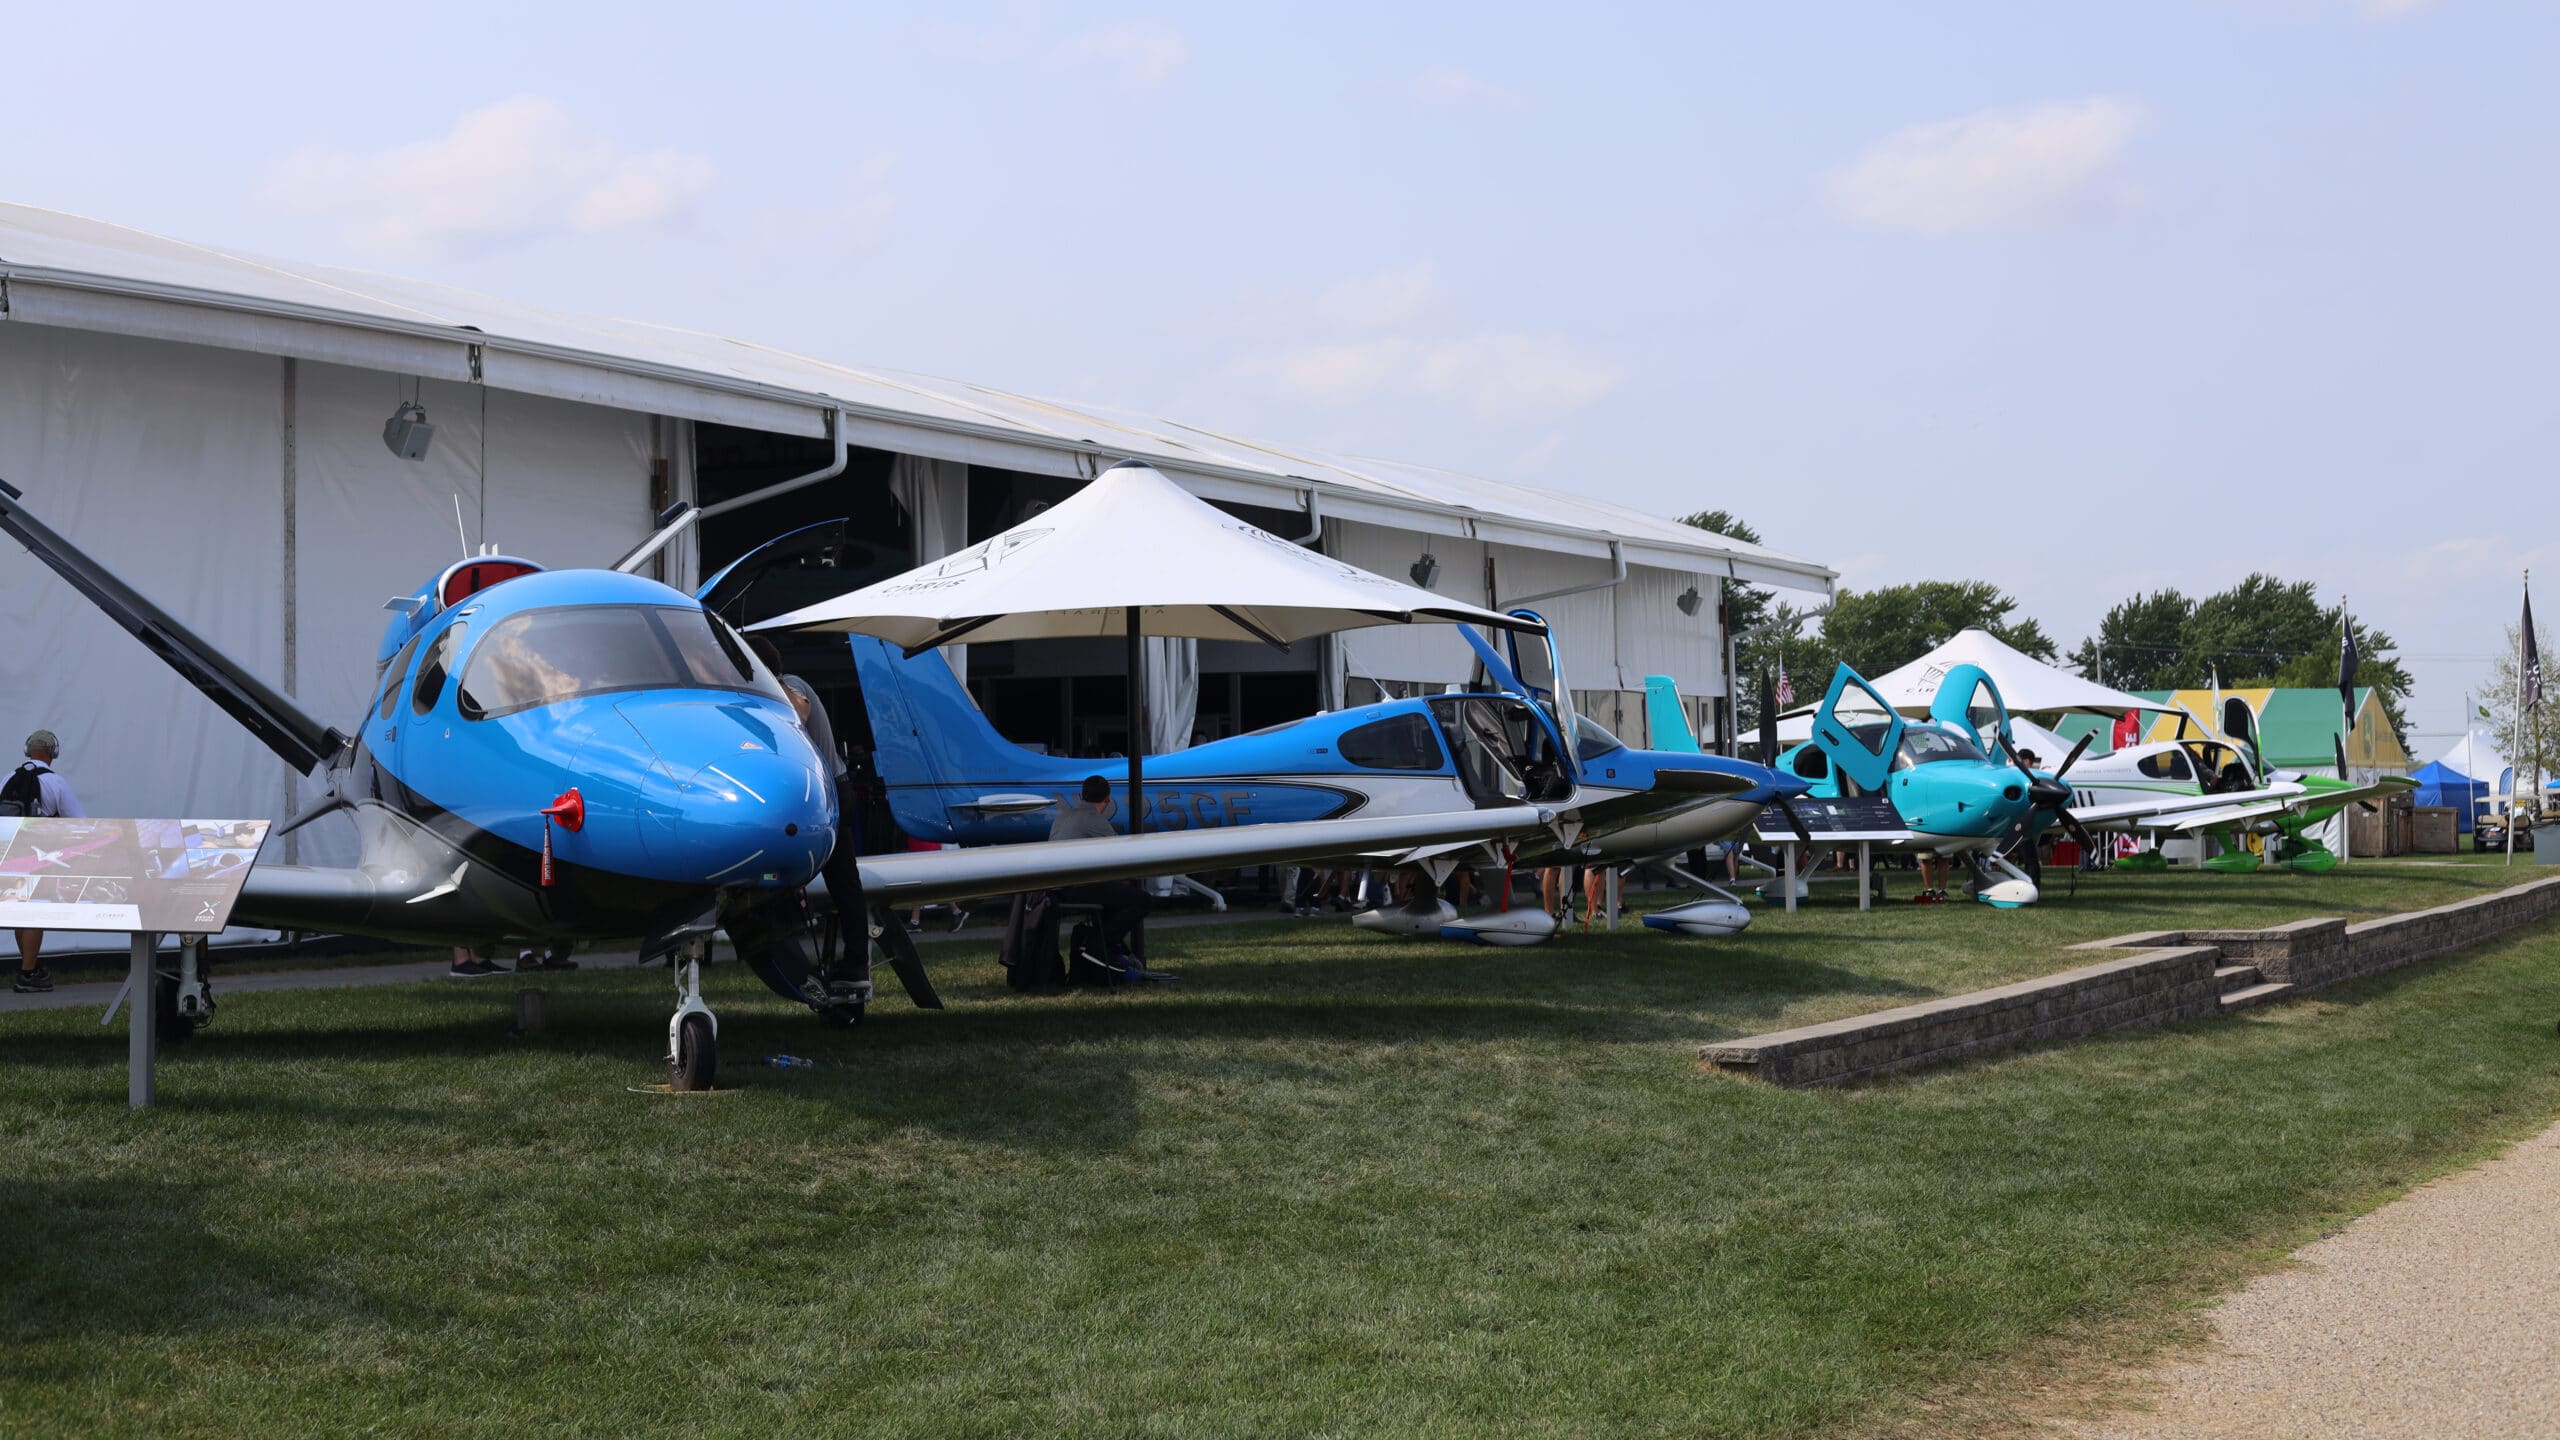 Our Top Tips for Flying and What to Pack for EAA AirVenture Oshkosh